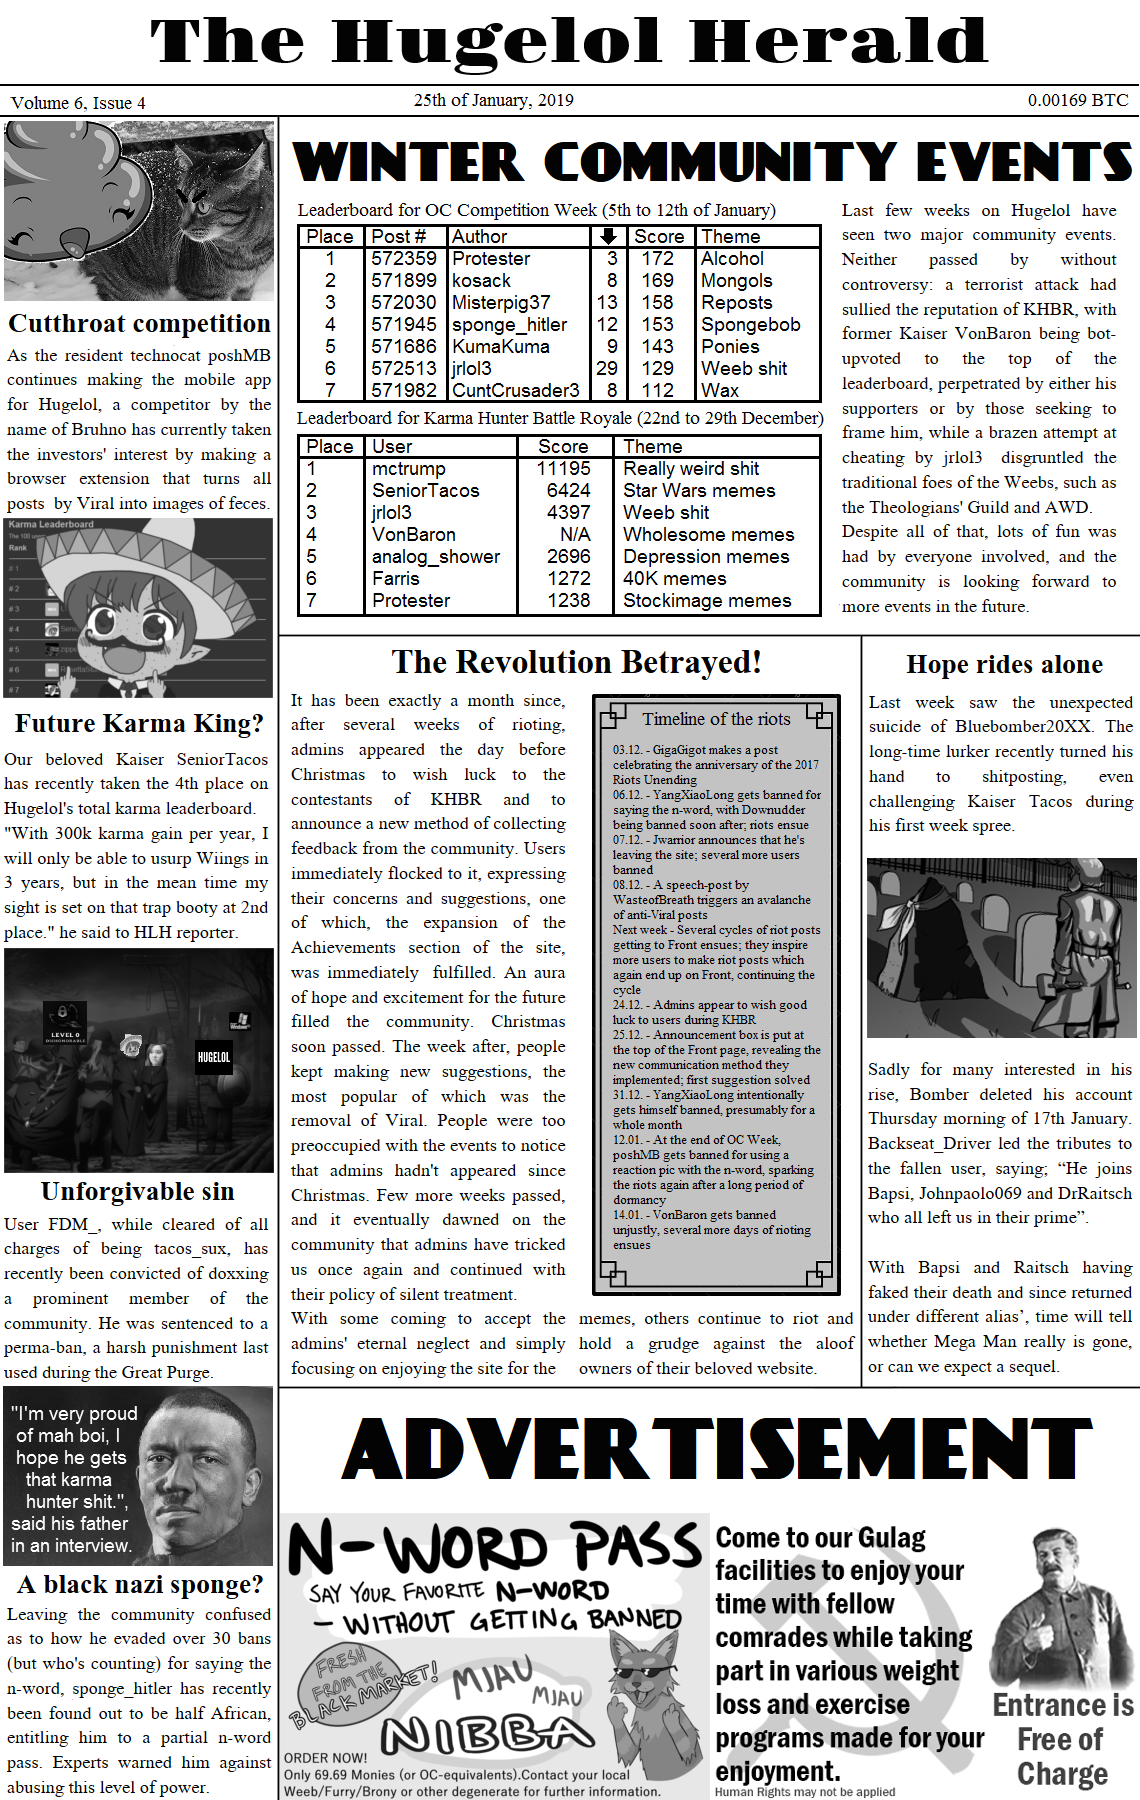 The Hugelol Herald, January 2019 issue